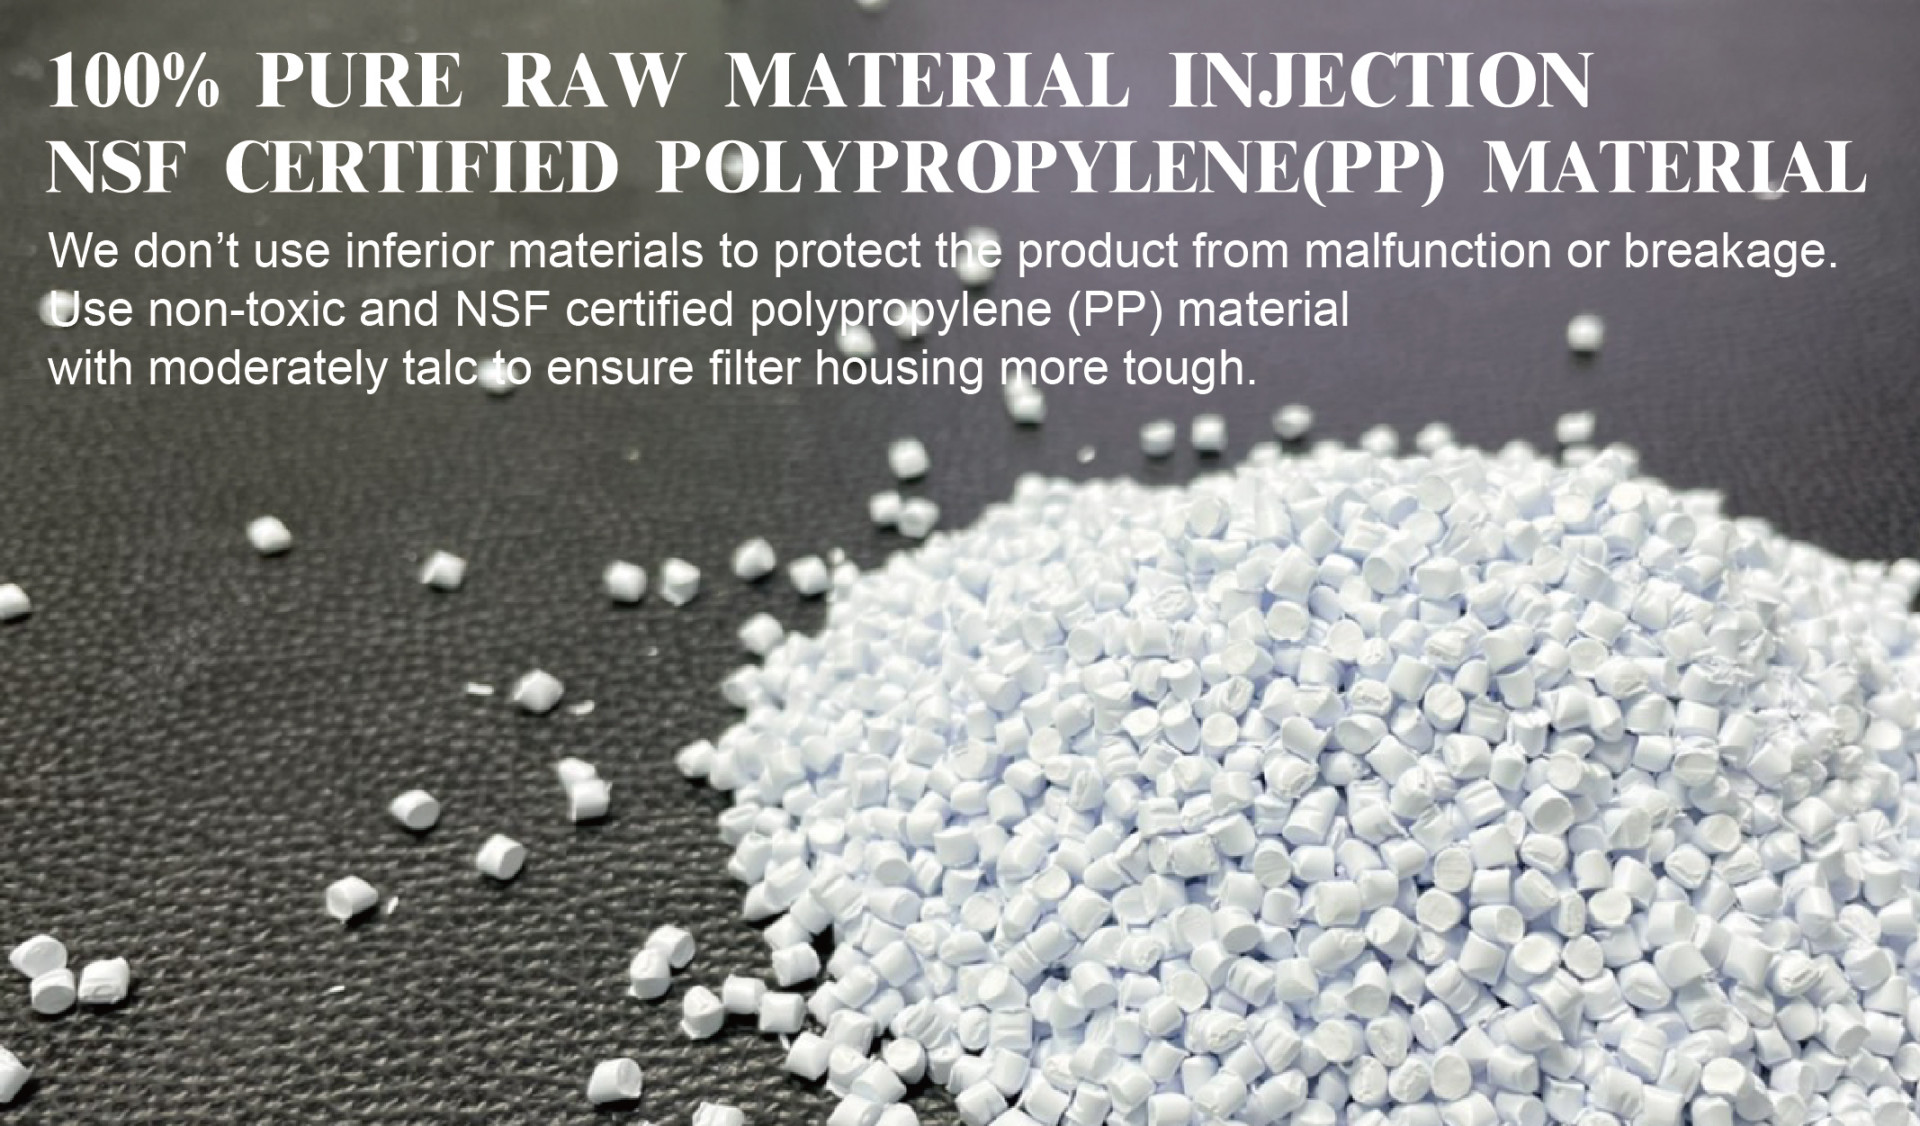 FILTER 100% PURE RAW MATERIAL INJECTION NSF CERTIFIED POLYPROPYLENE(PP) MATERIAL